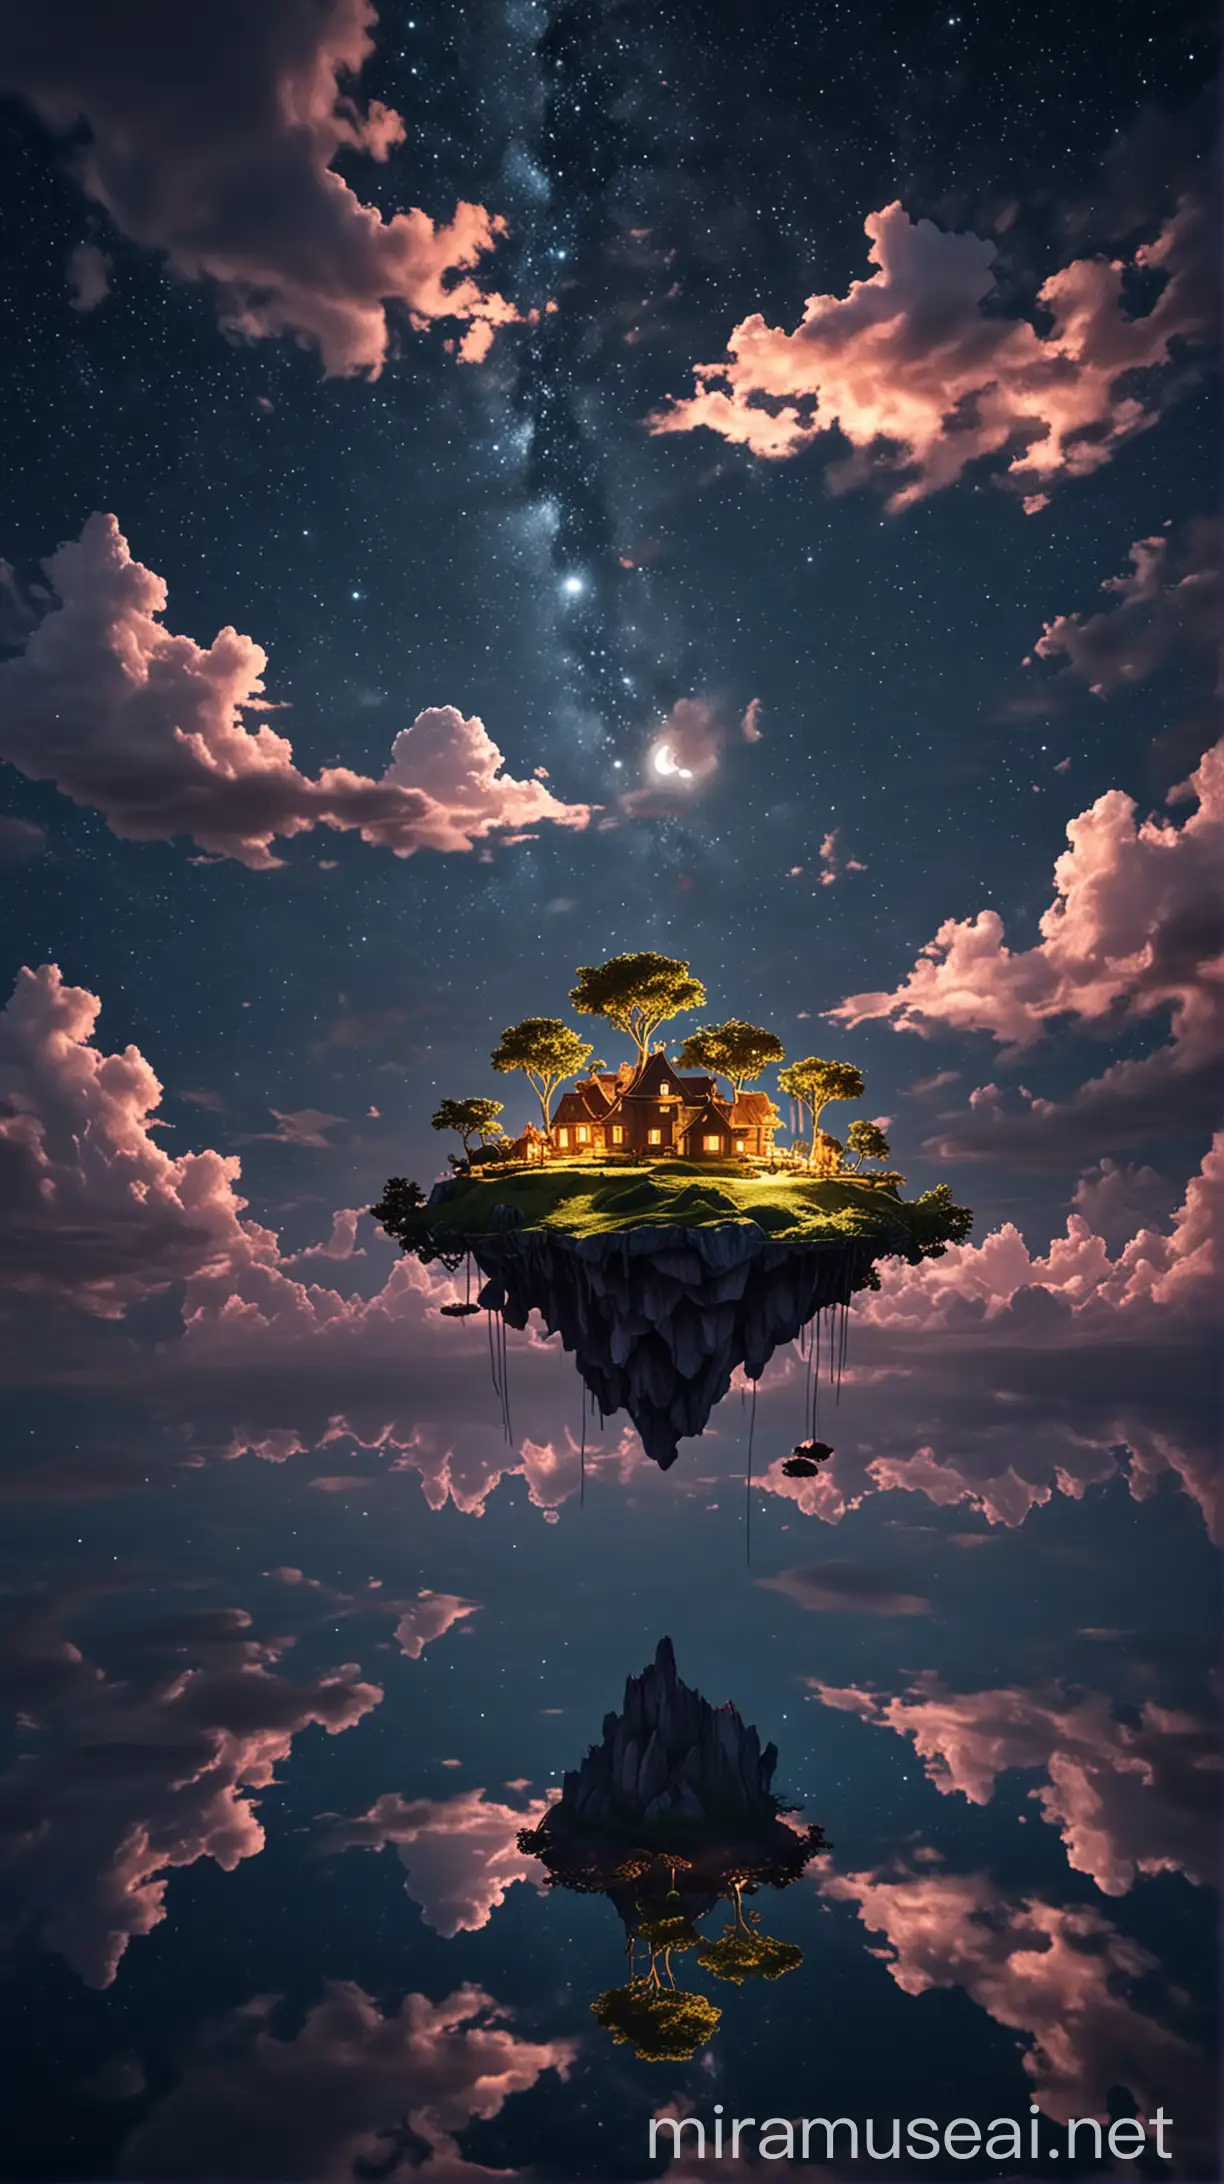 floating islands at night with pretty clouds